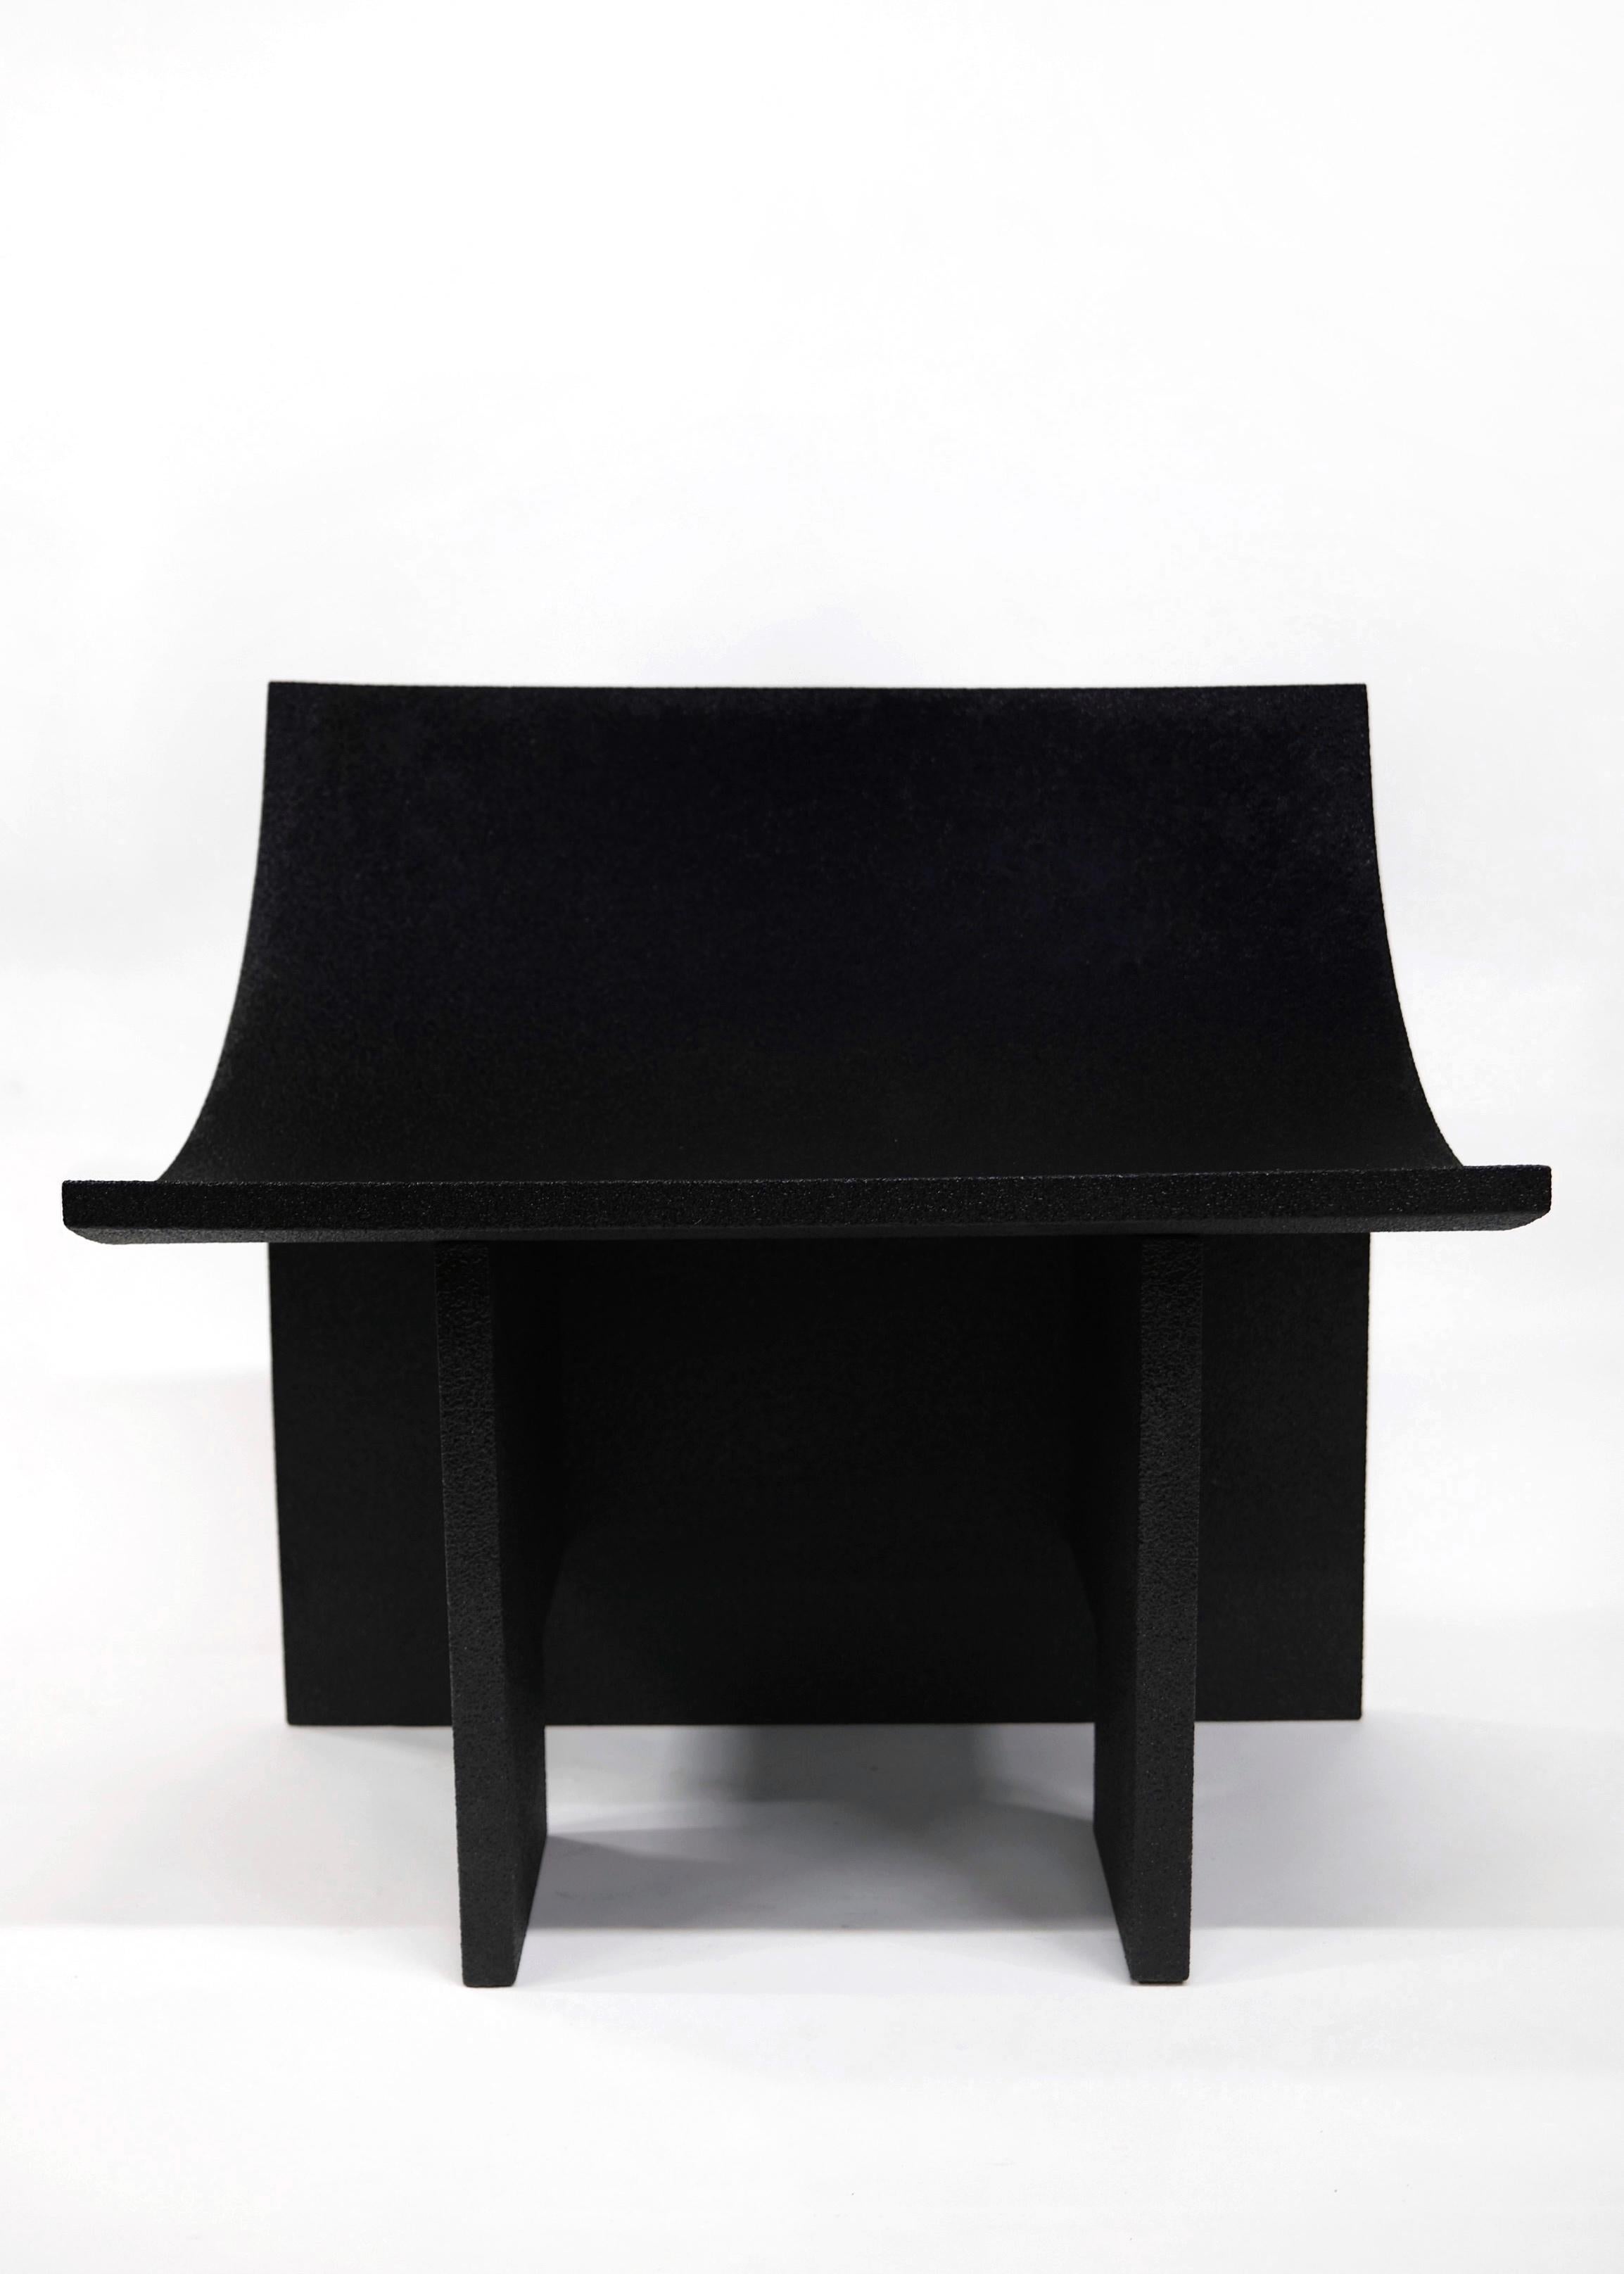 JD01 Noir Contemporary Chair in Plywood For Sale 2